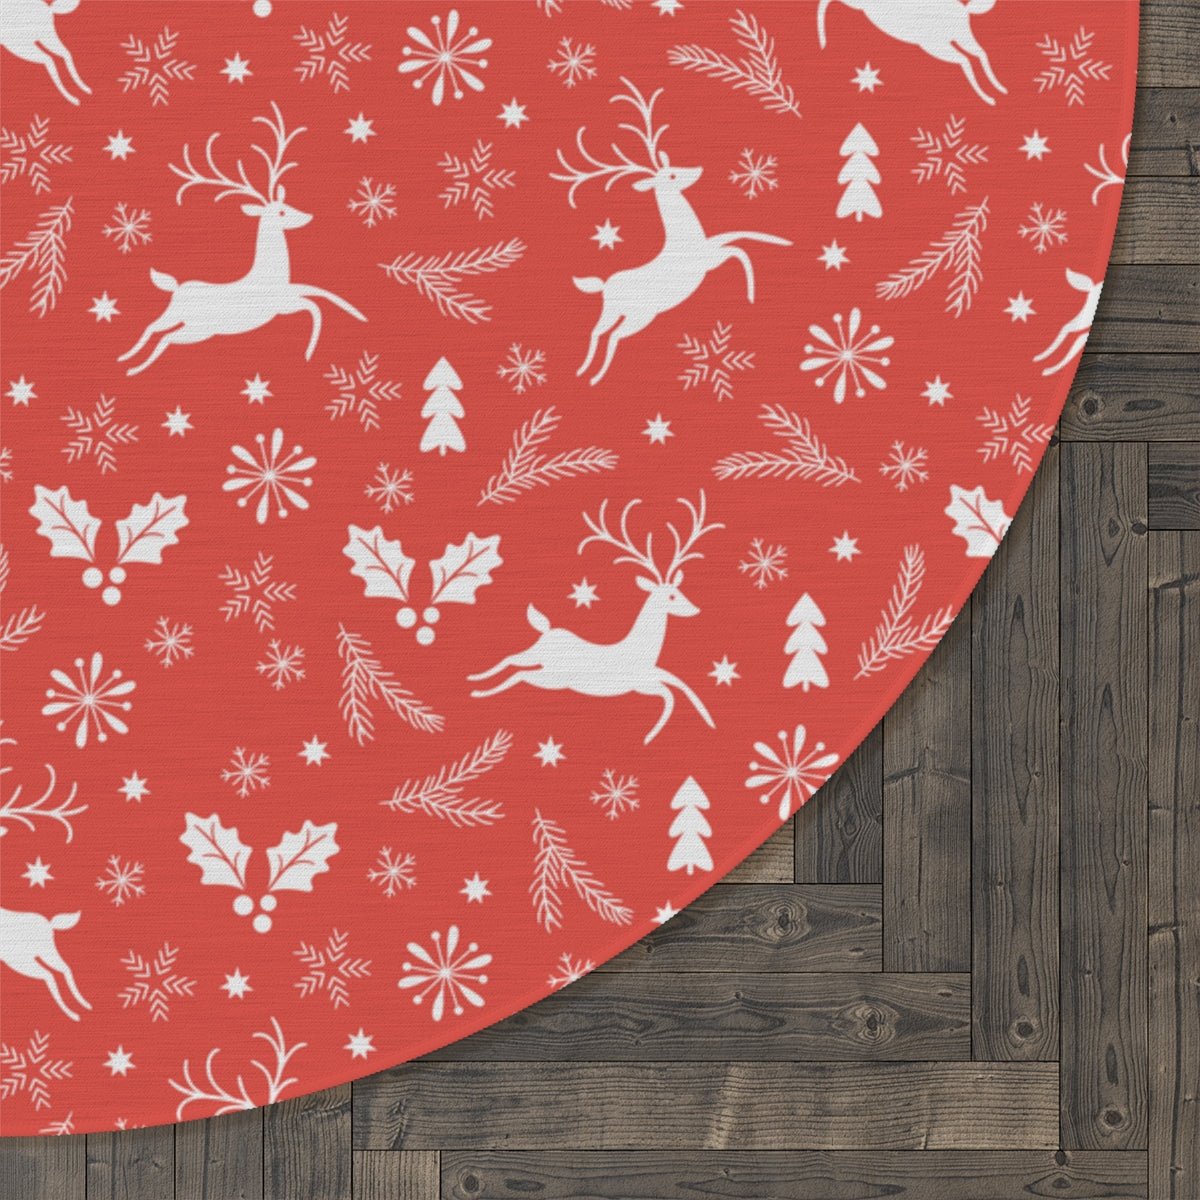 Christmas Reindeers Round Rug - Puffin Lime